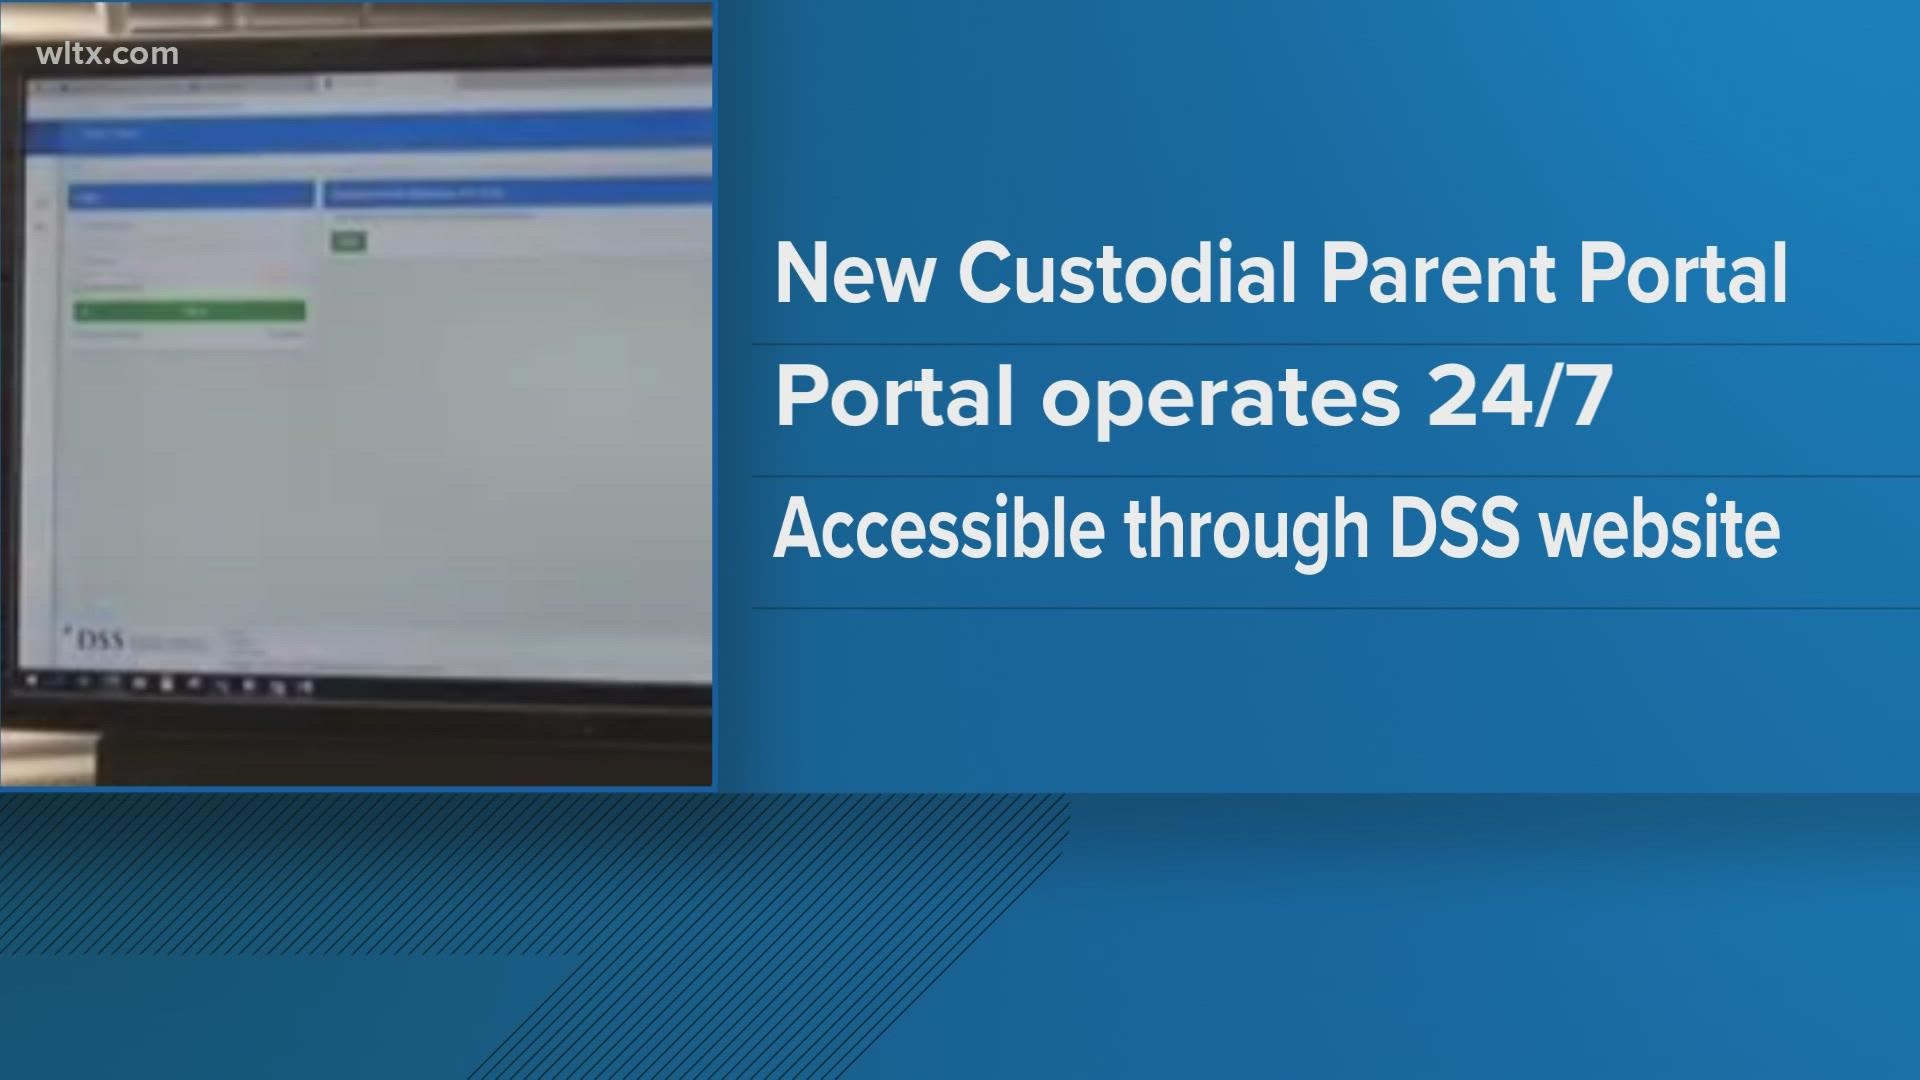 DSS is hoping that this makes it easier to update applications for child support.